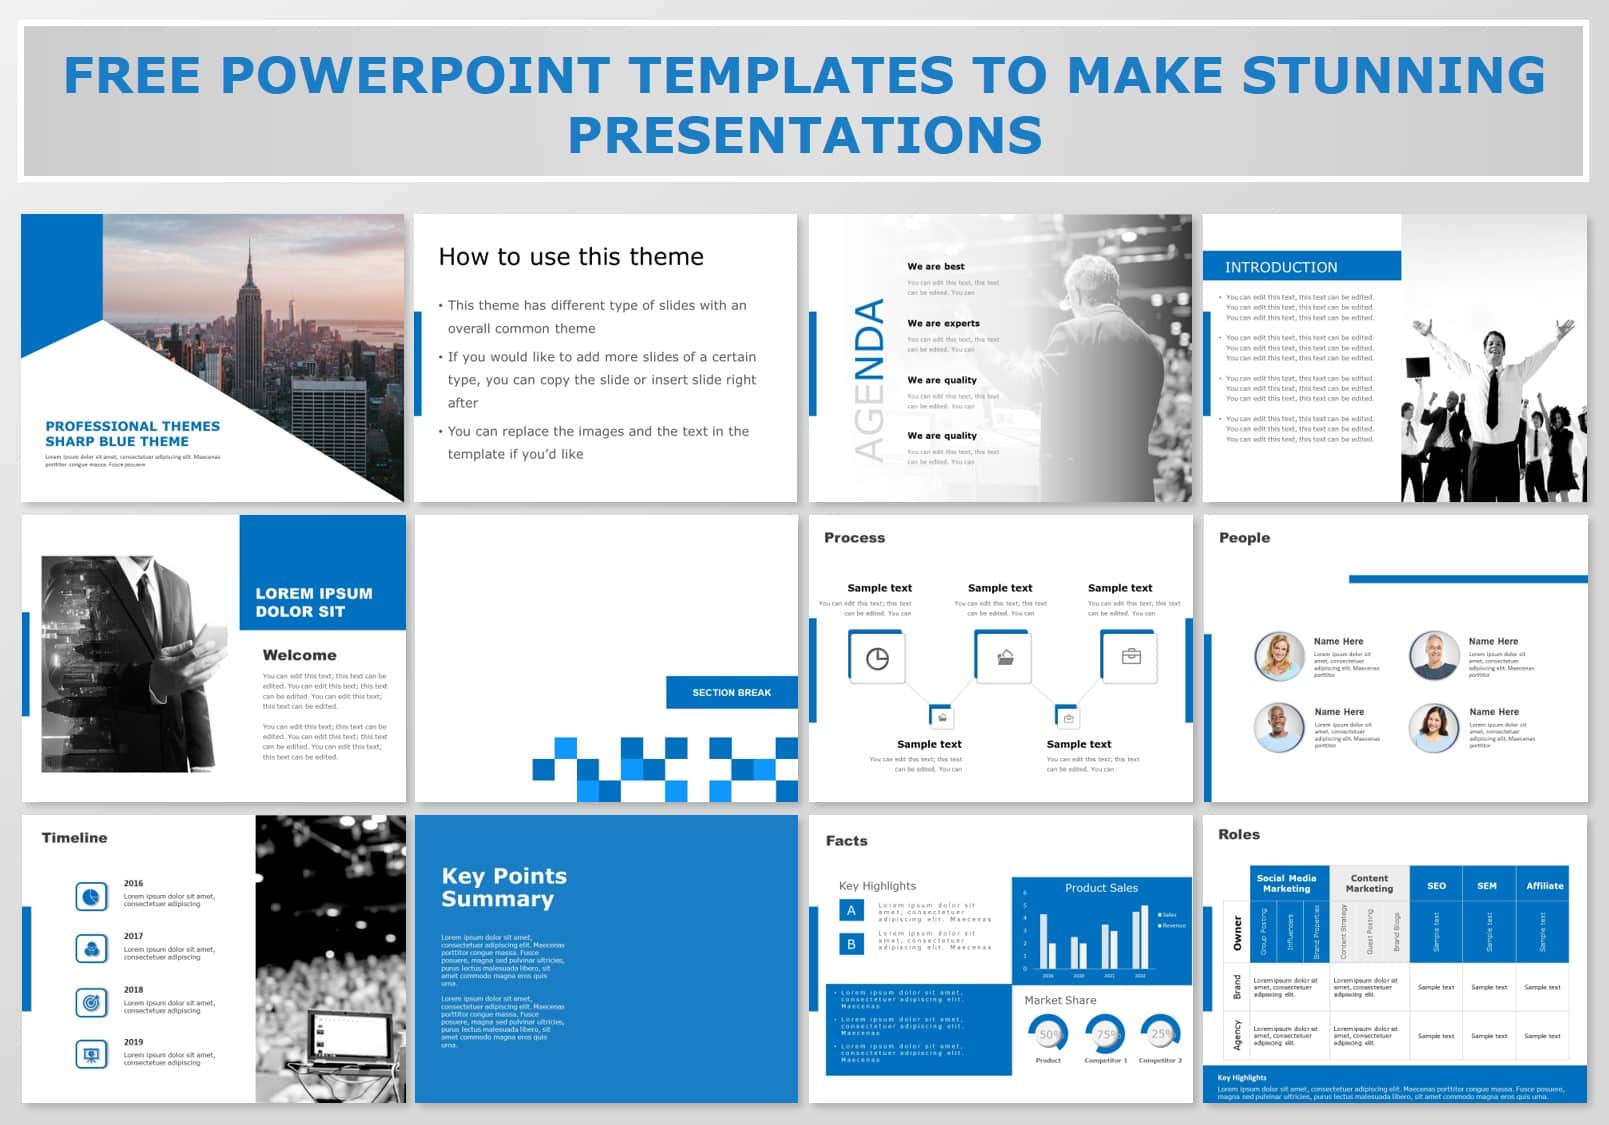 Discover Best Predesigned Free PowerPoint Templates To Create Winning